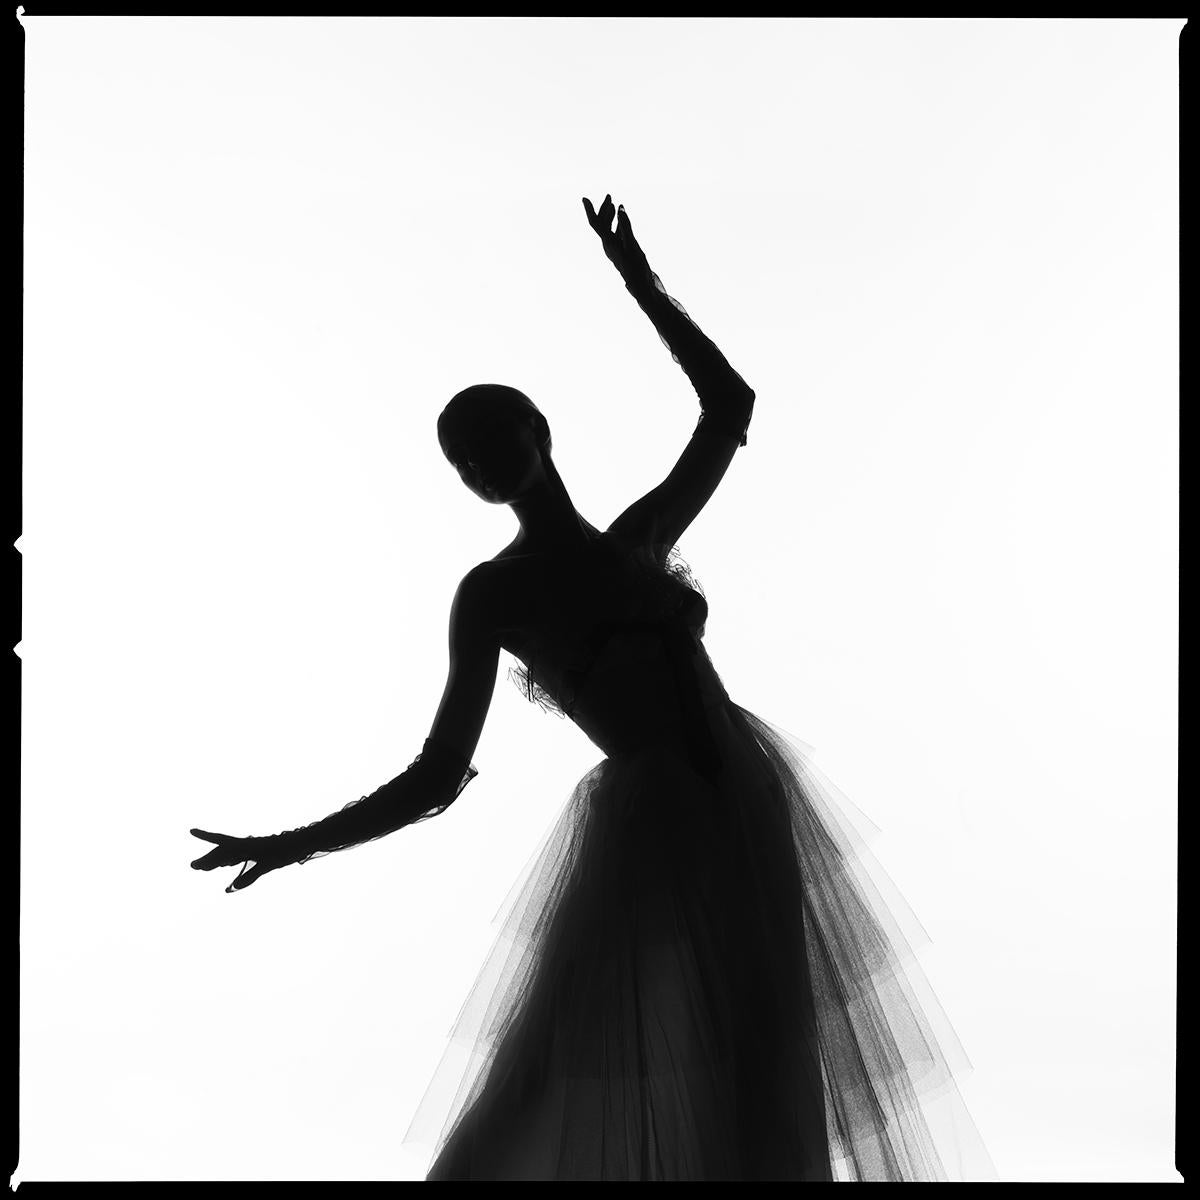 Tyler Shields - Dress Silhouette, Photography 2020, Printed After